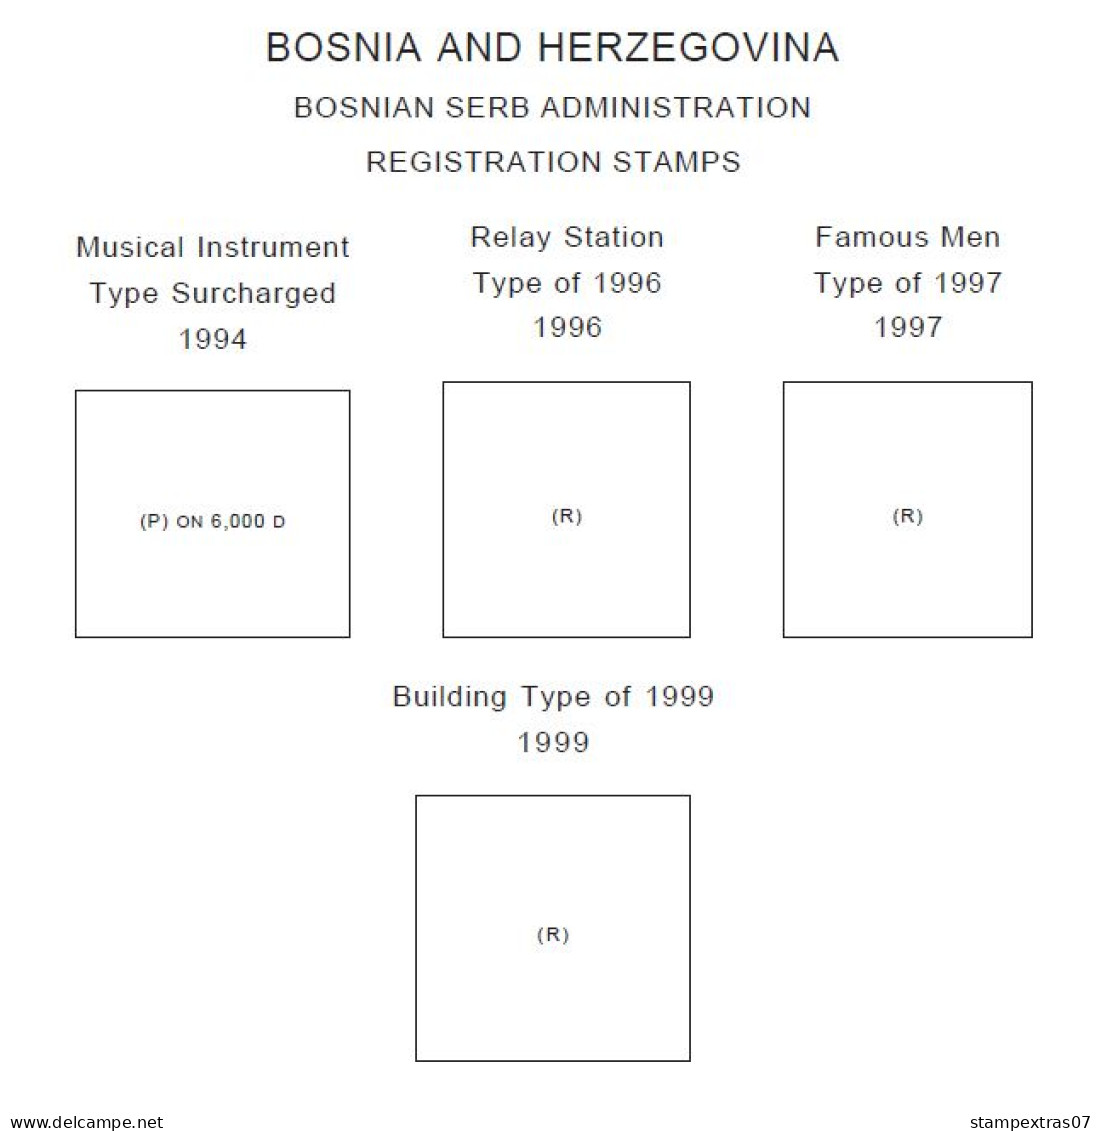 BOSNIA & HERZEGOVINA STAMP ALBUM PAGES 1879-2011 (218 Pages) - English